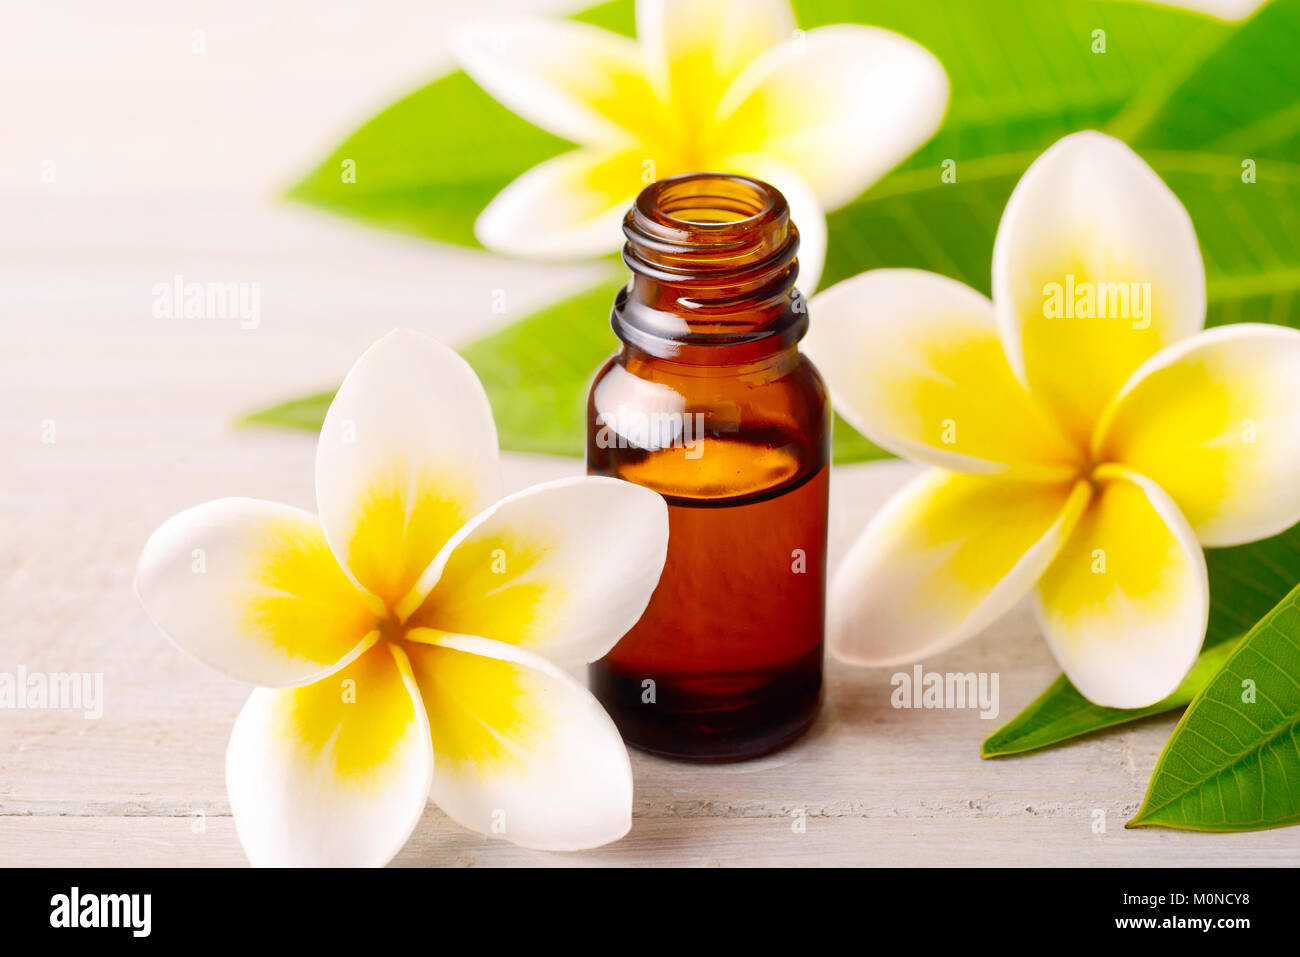 plumeria flowers and Plumeria Essential Oil Perfume on the wooden table Stock Photo